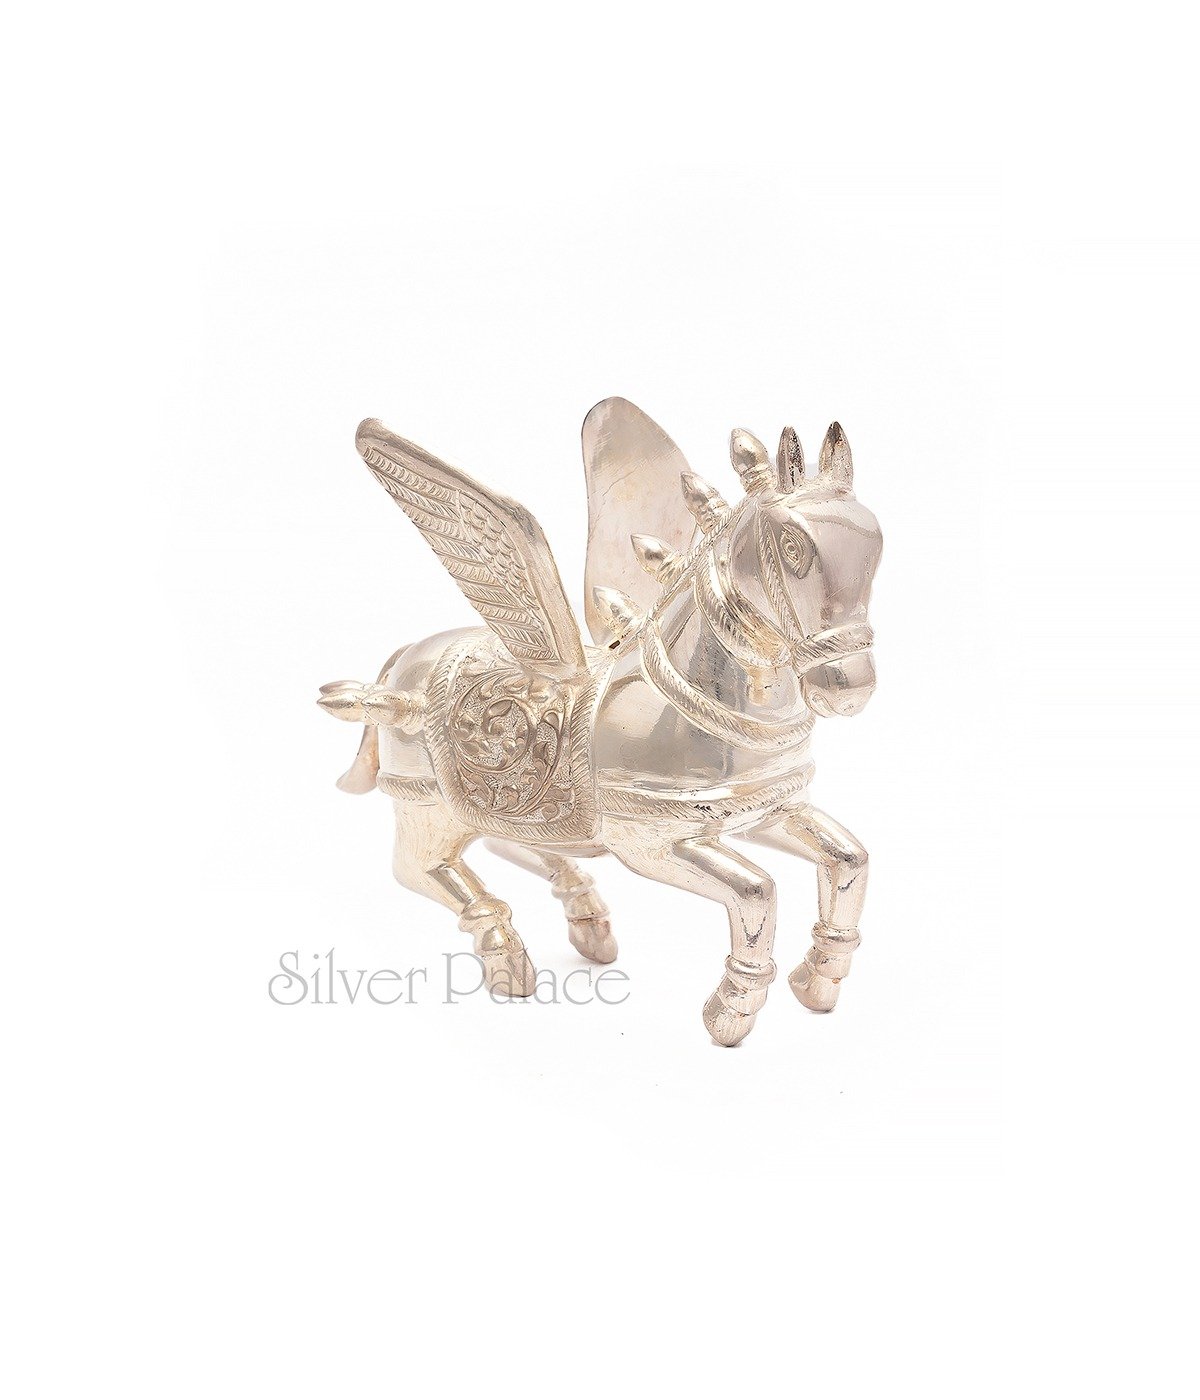 STERLING SILVER FLYING HORSE STATUE